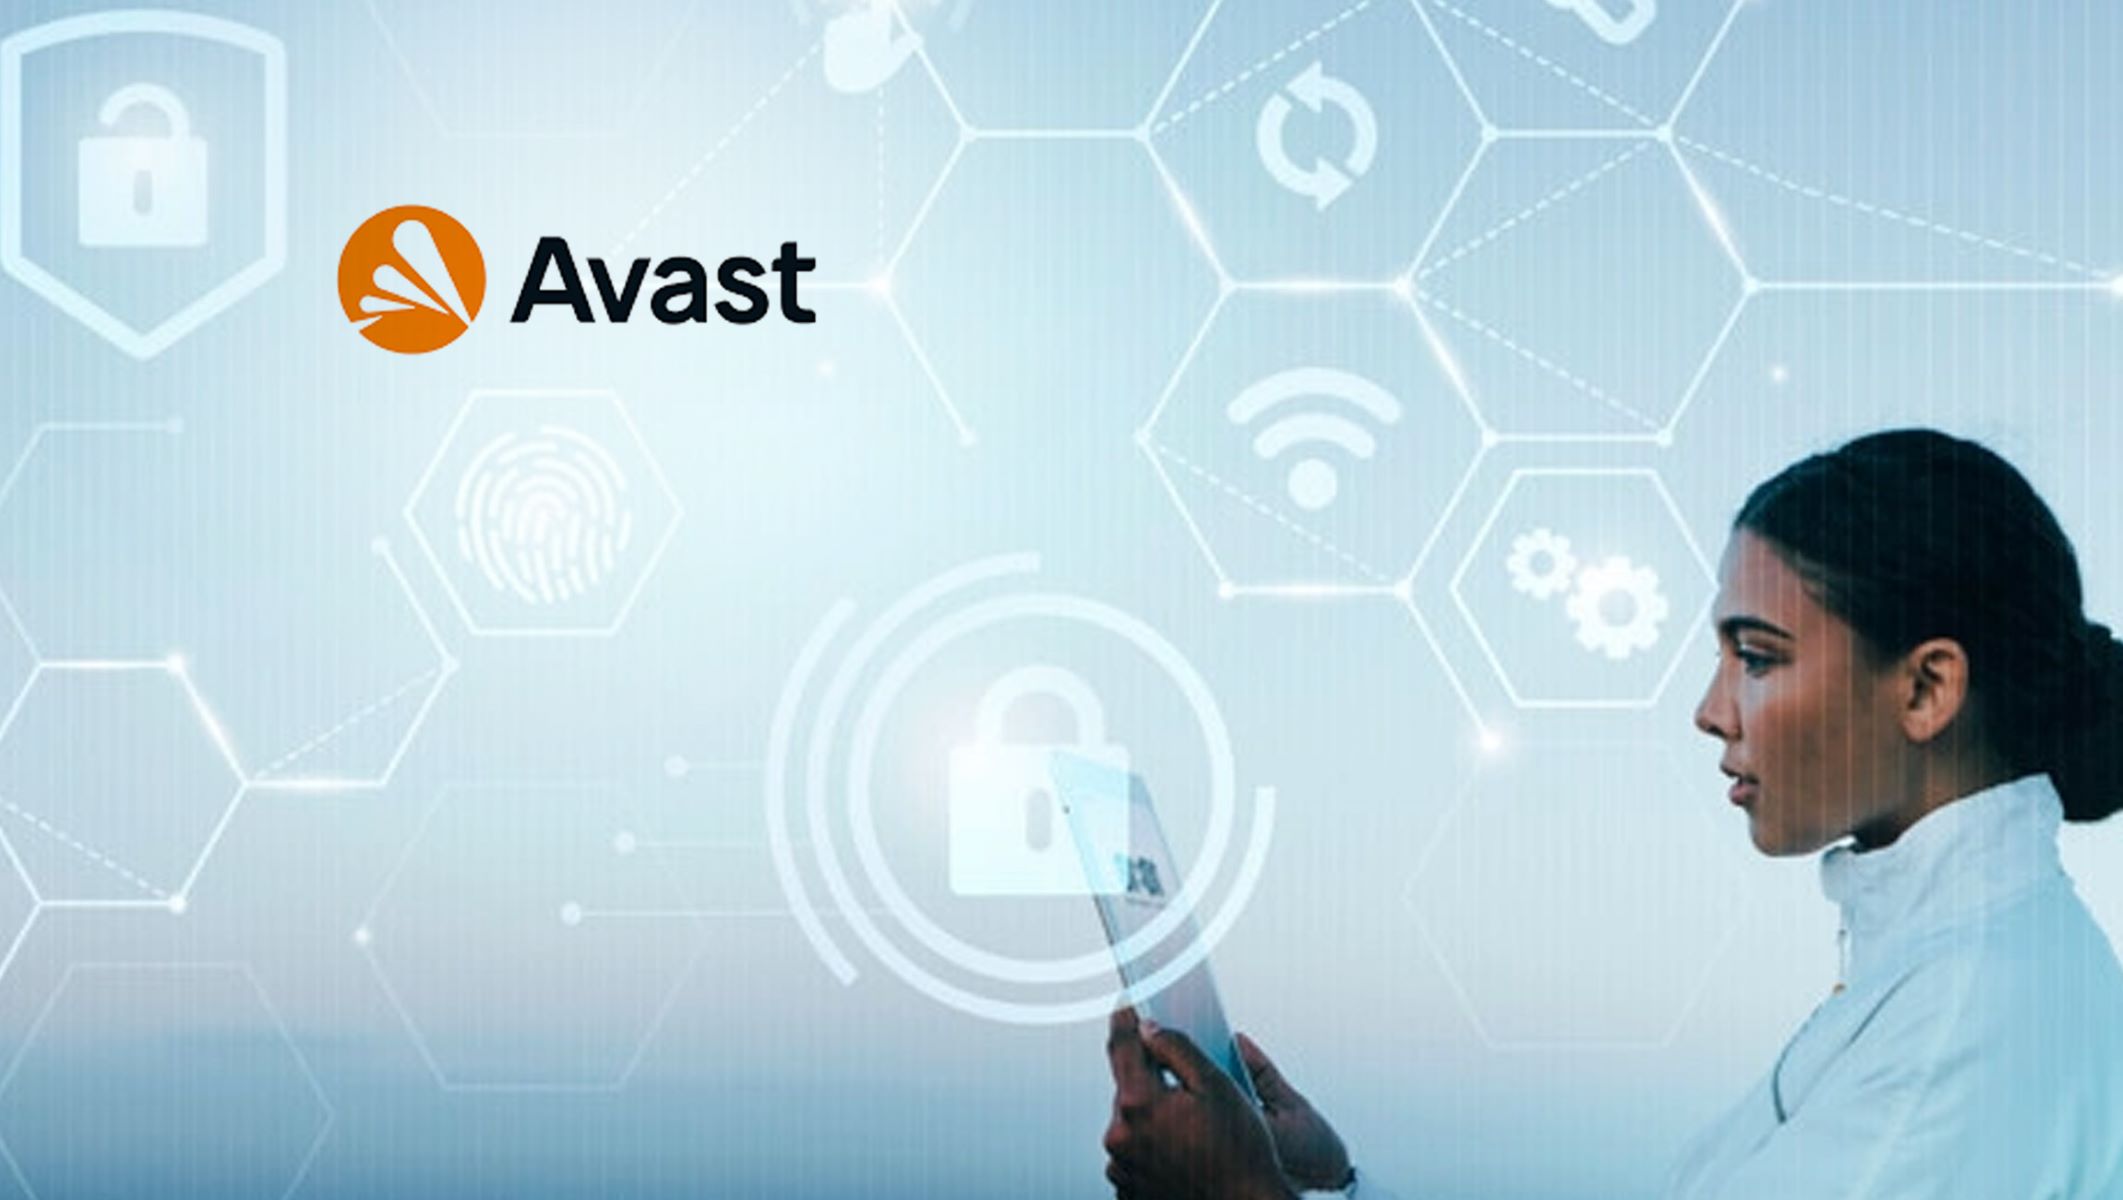 How To Allow A Program Through Avast Firewall